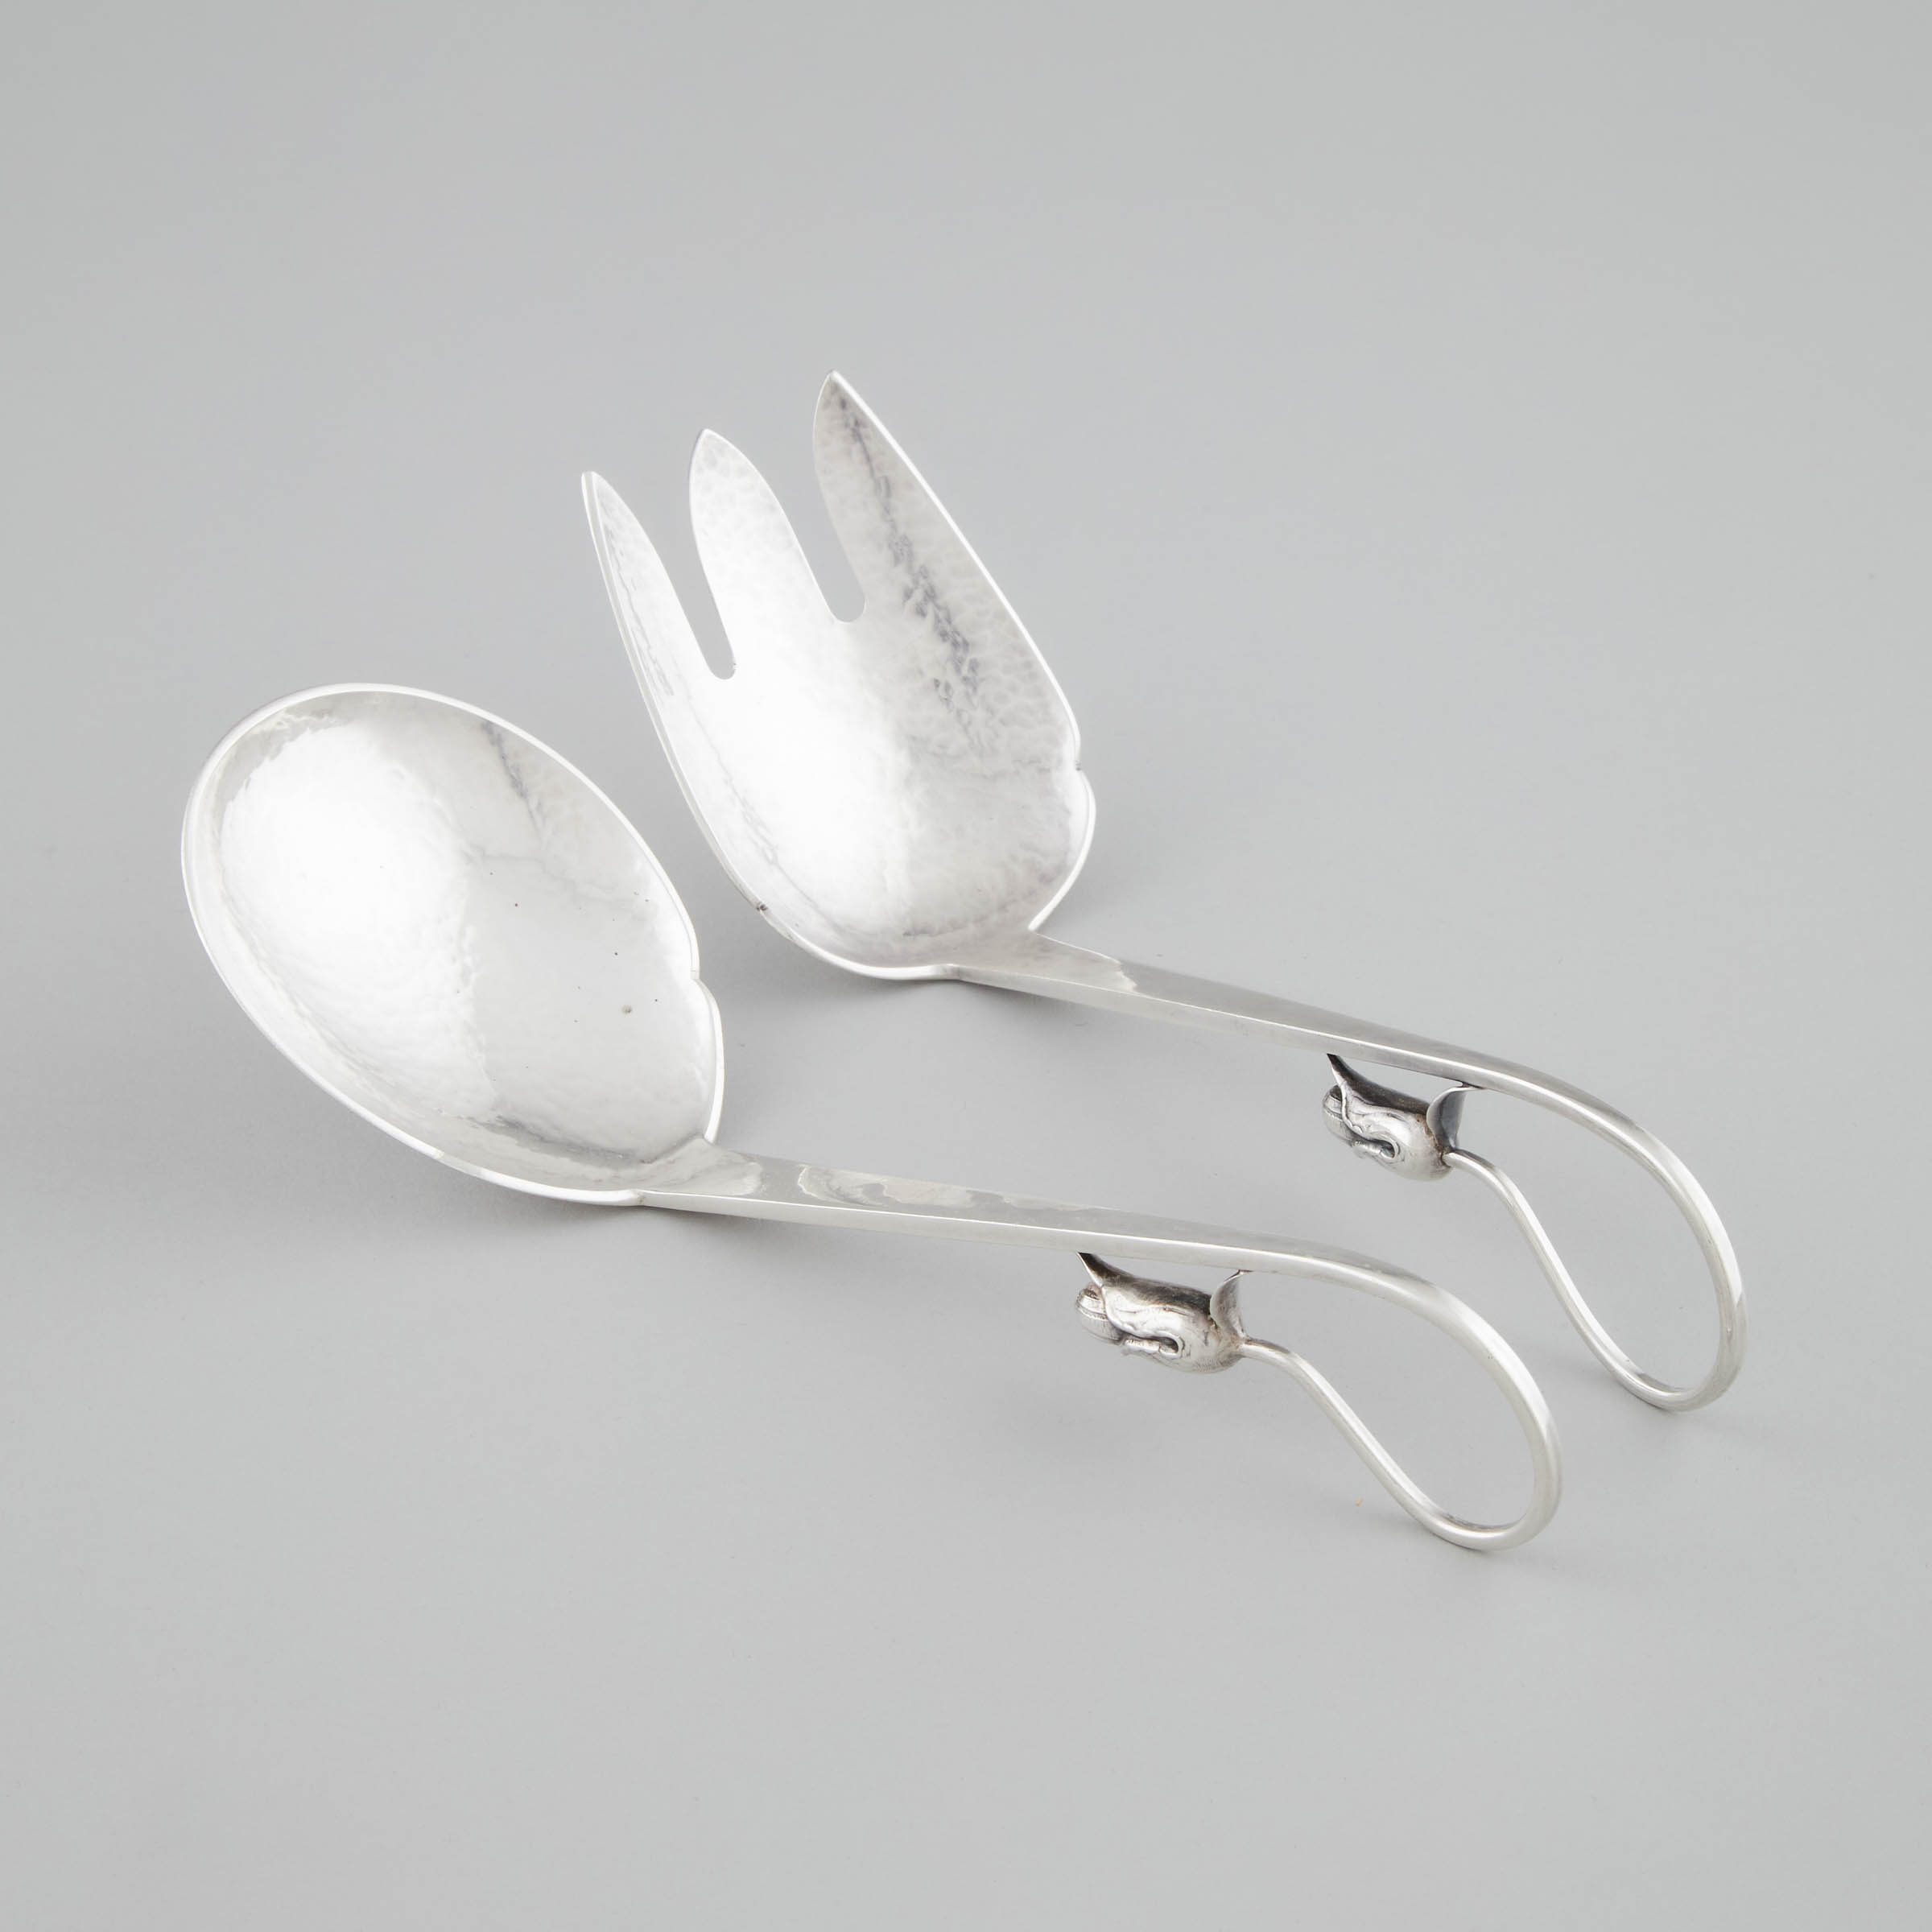 Pair of Canadian Silver Salad Servers,